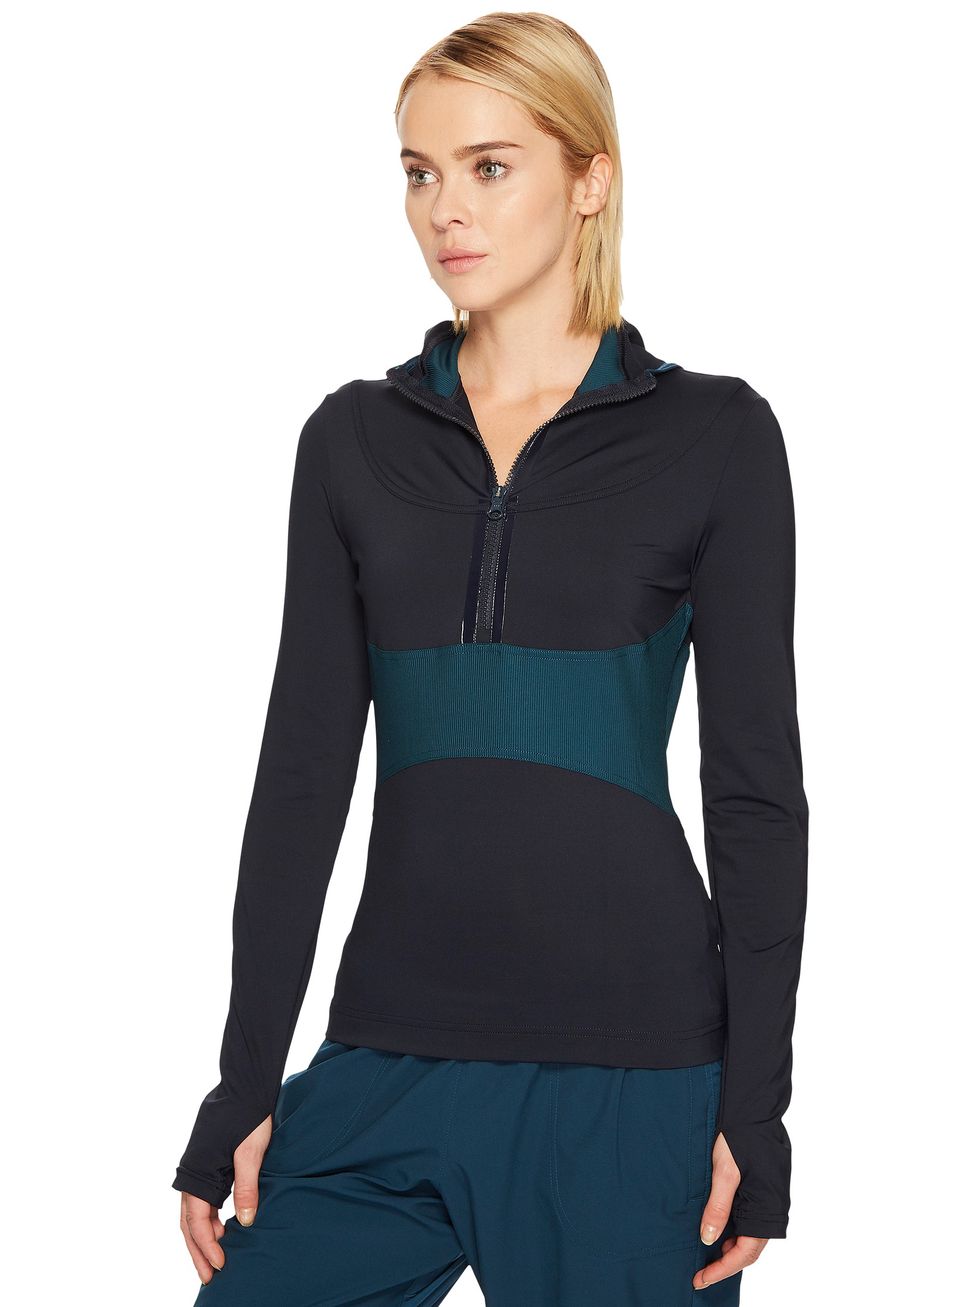 Running clothes for women